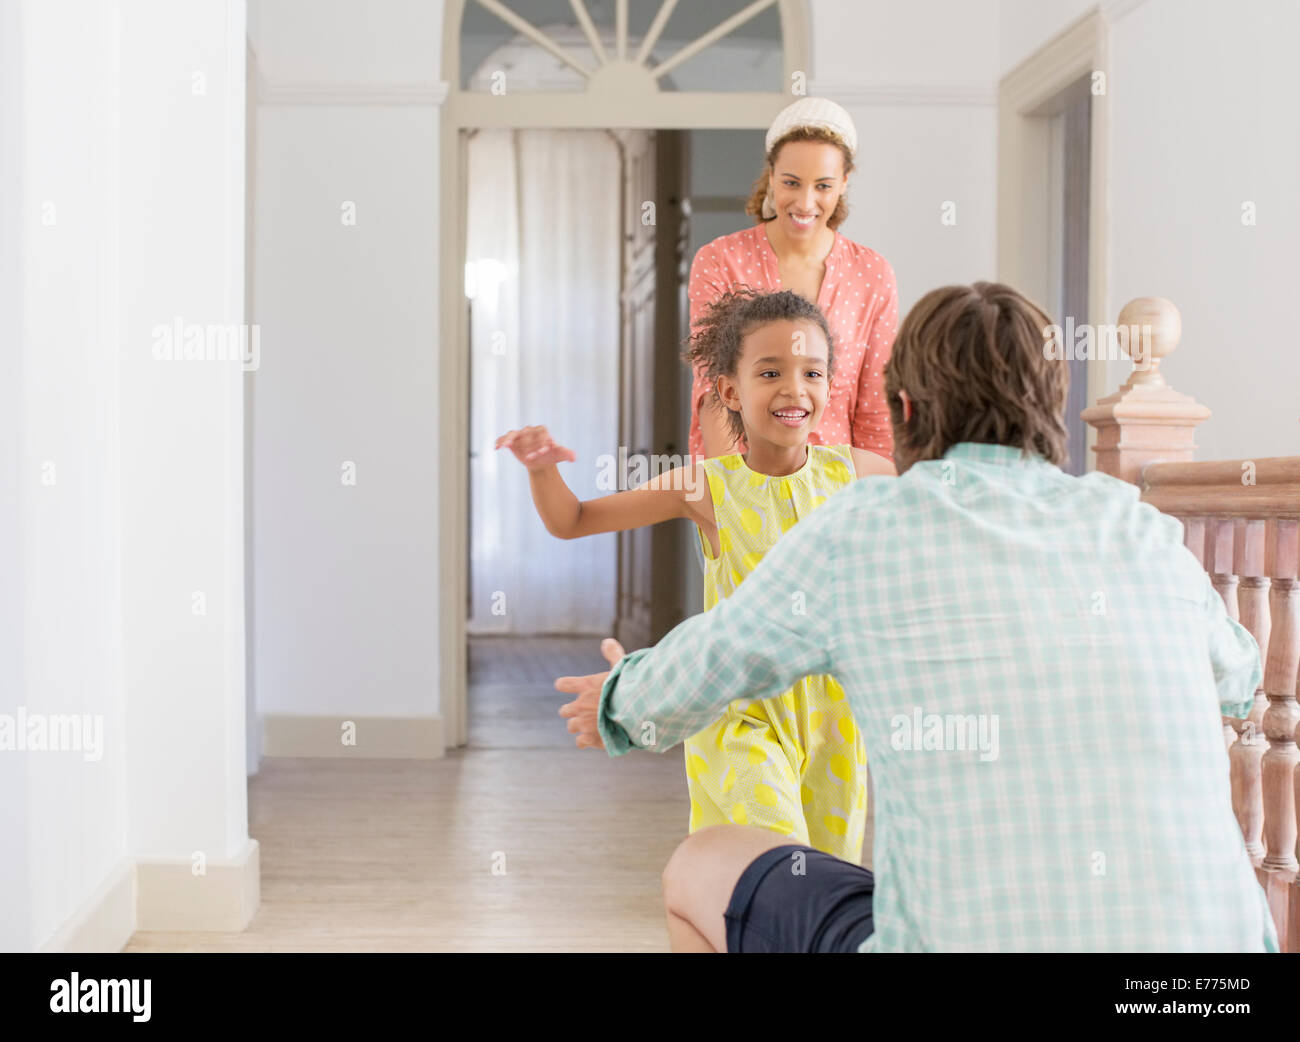 Father and daughter embracing in living space Stock Photo